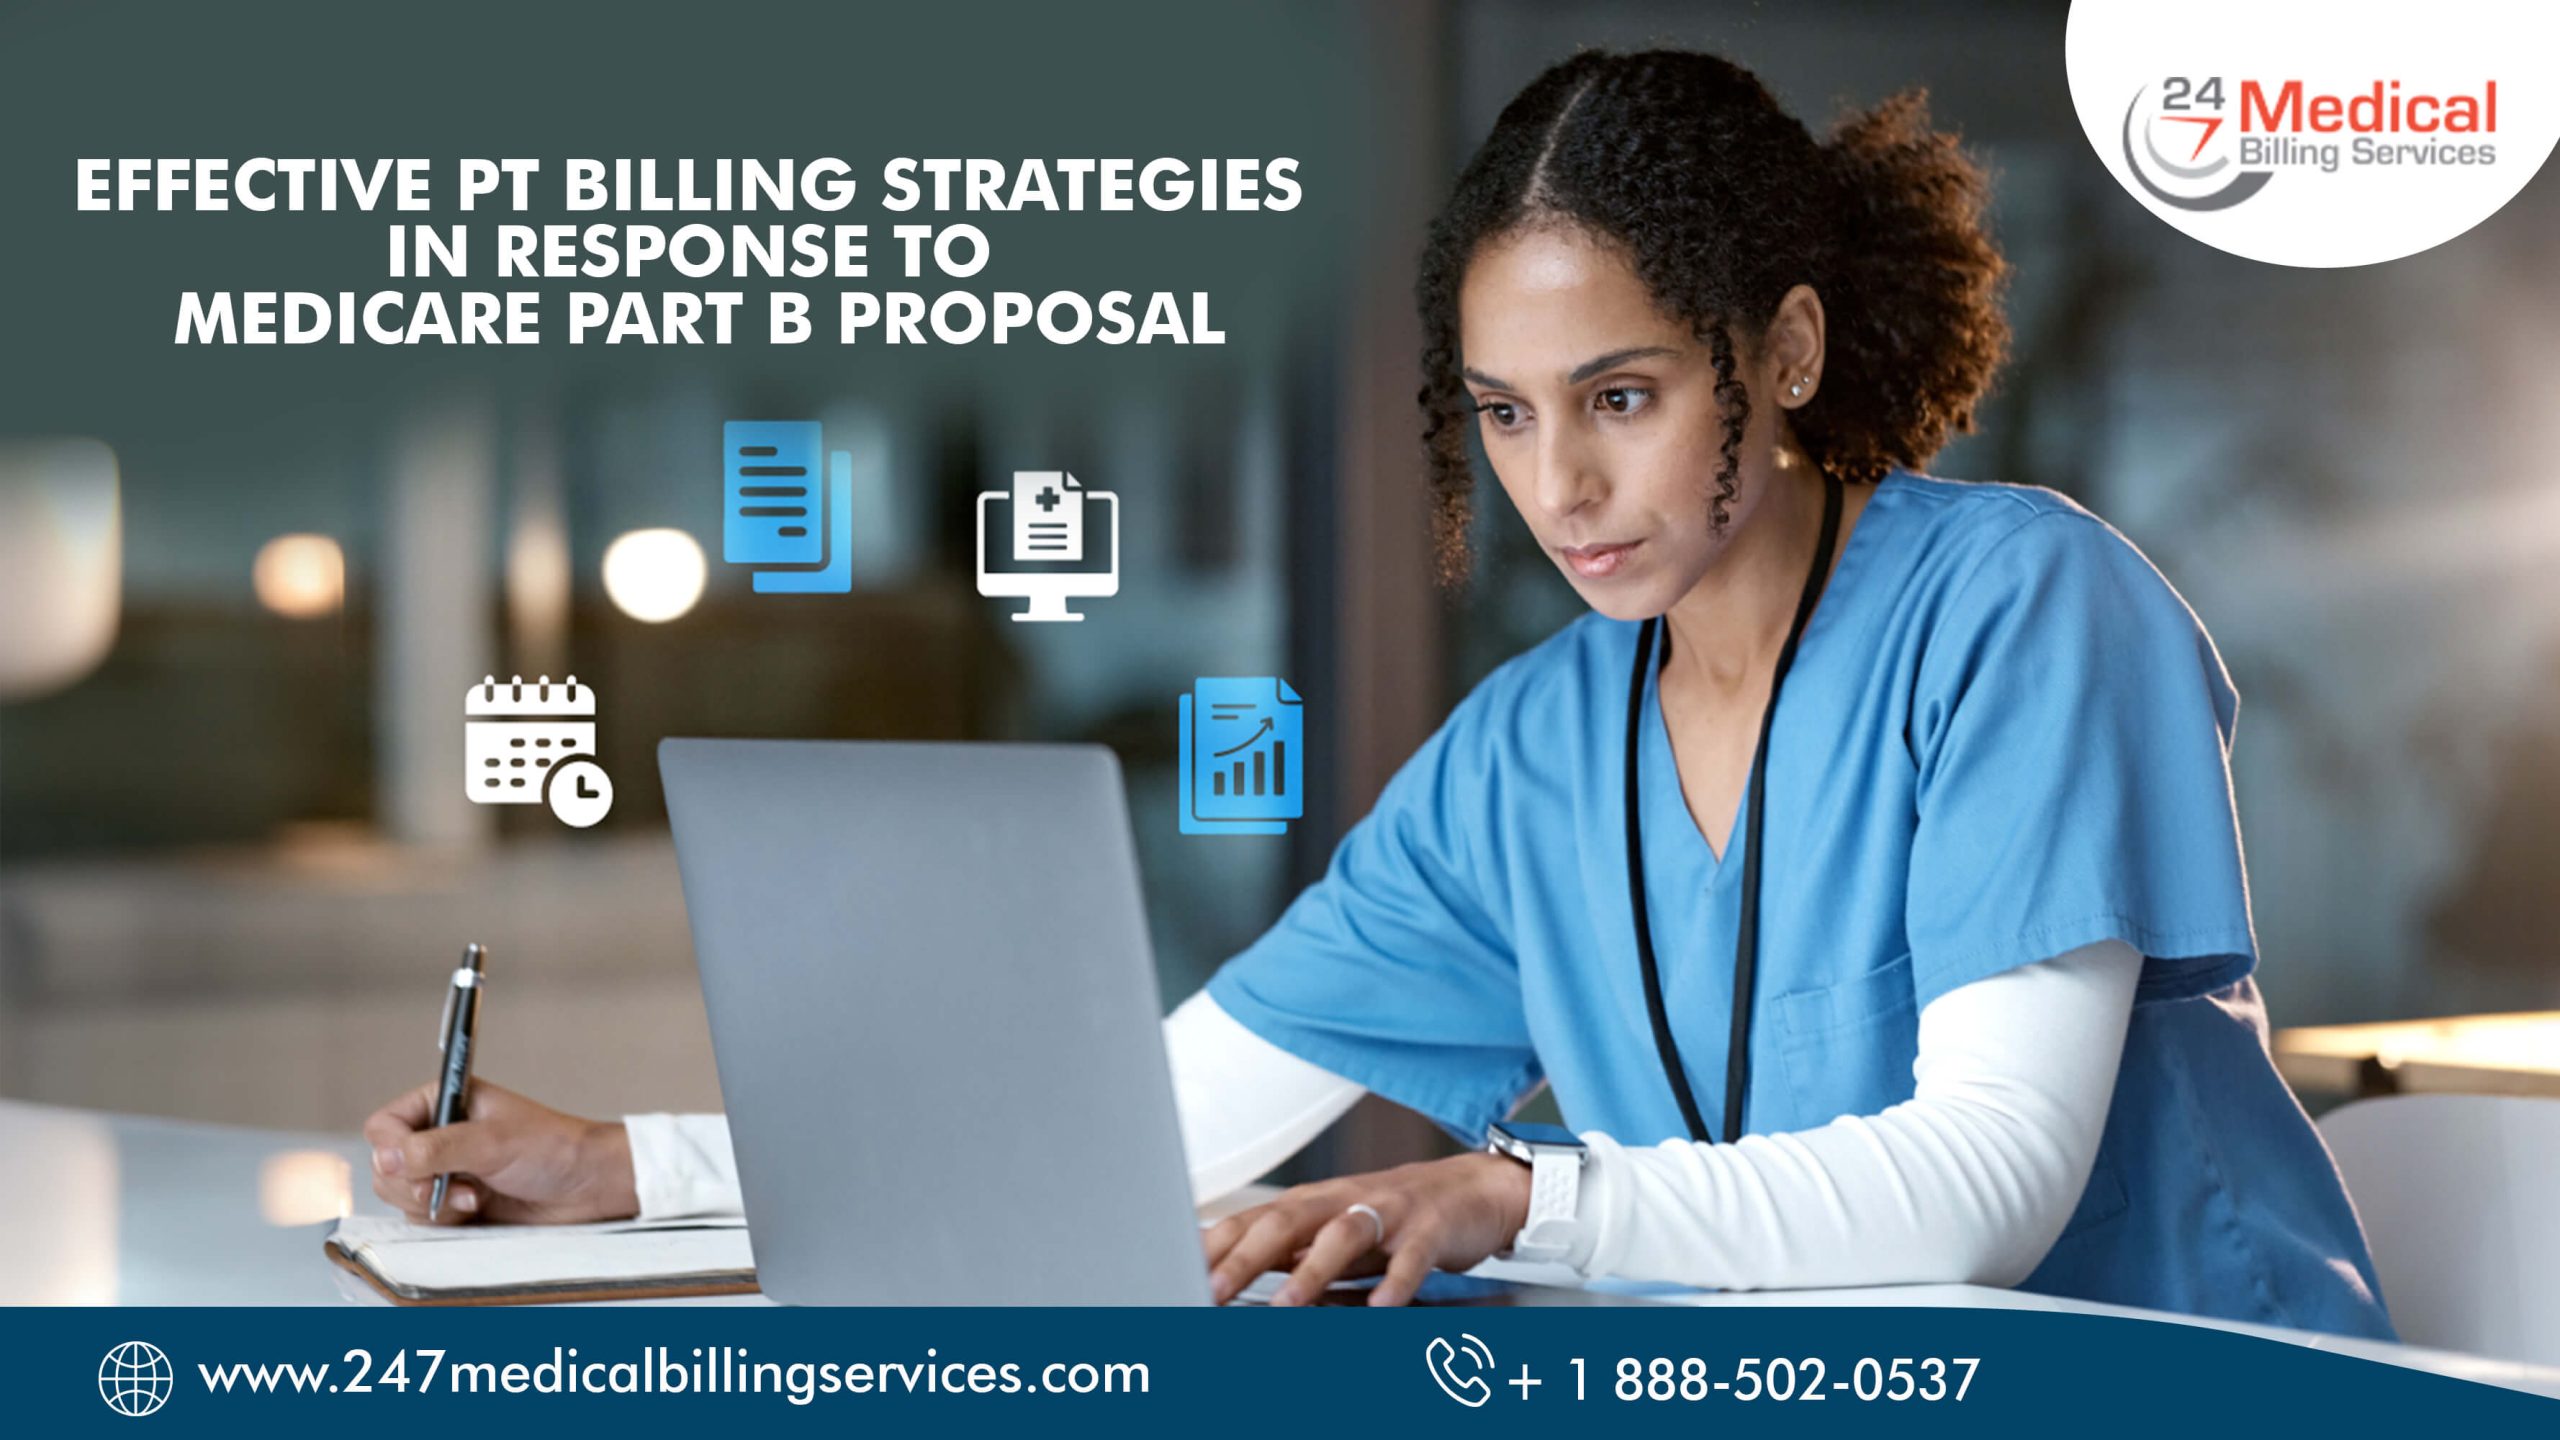  Effective PT Billing Strategies in Response to Medicare Part B Proposal